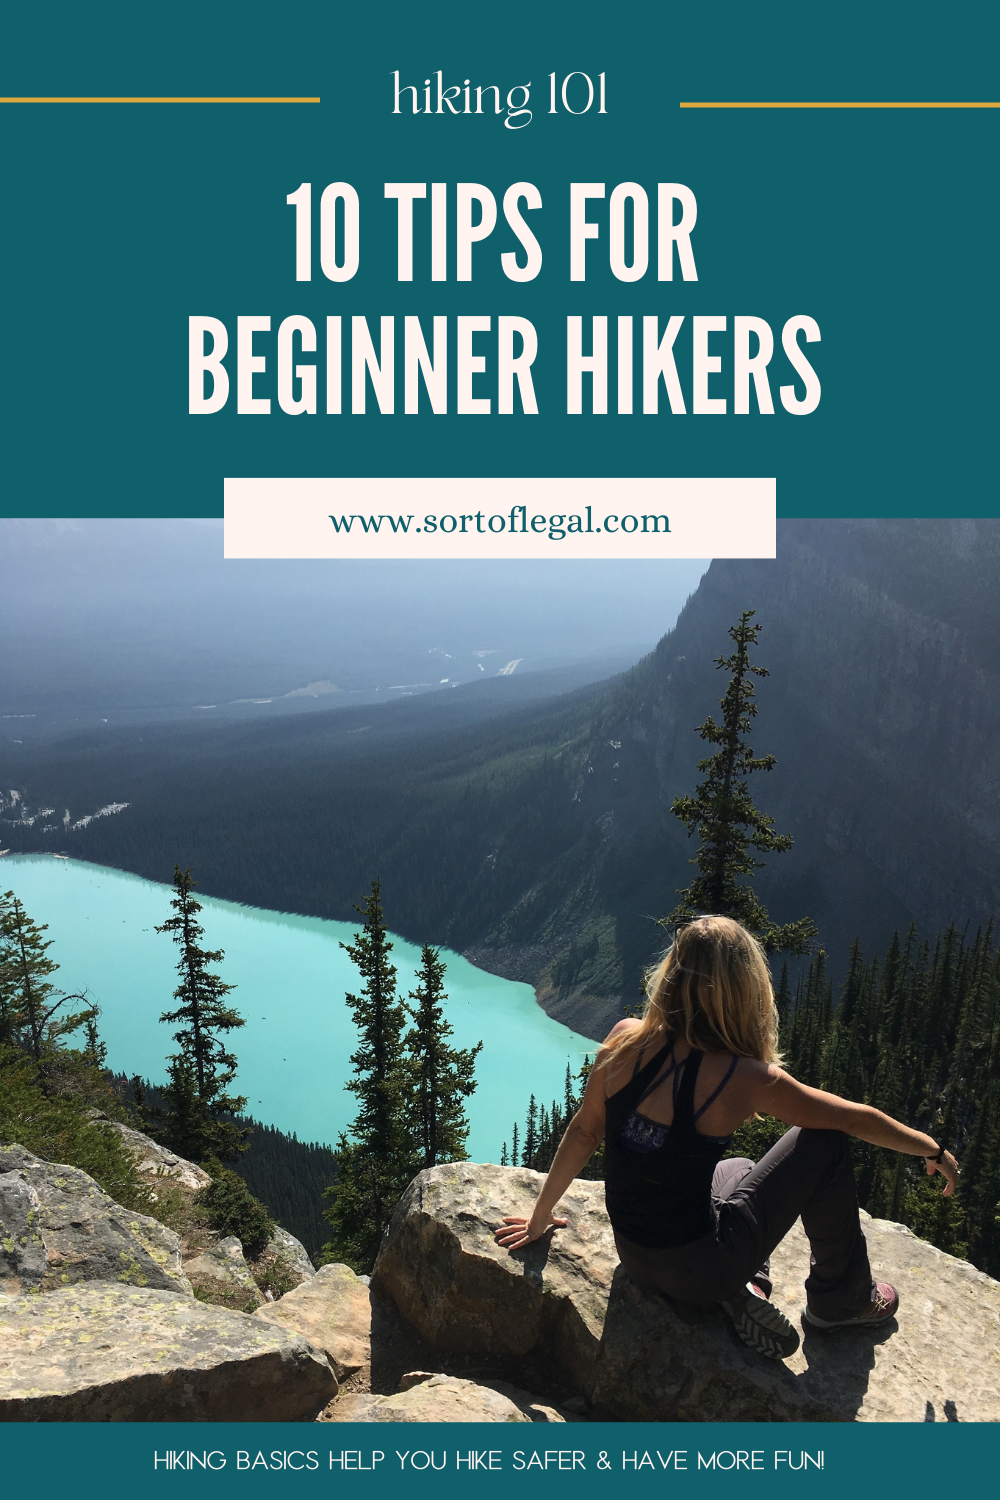 10 Tips for Beginner Hikers Title Image. Girl looking at lake.